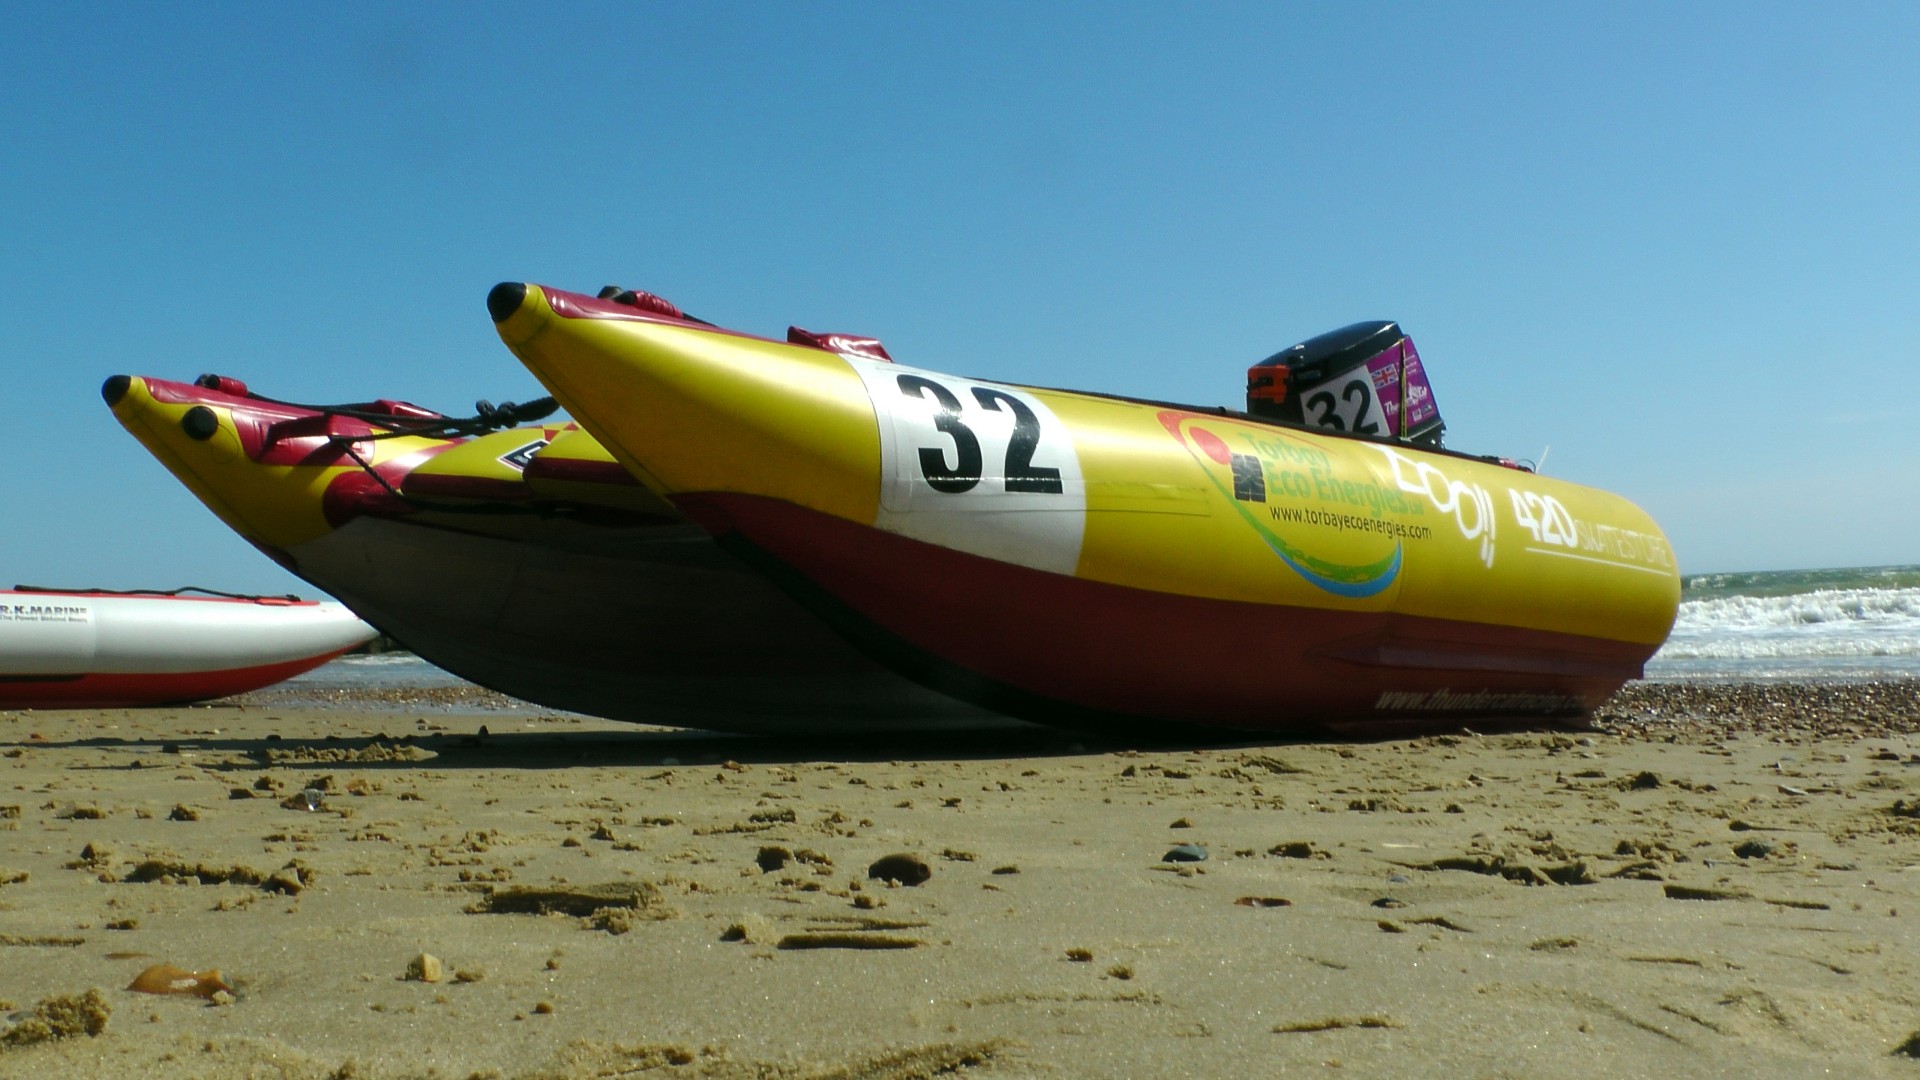 inflatable powerboat beach powerboat racing event powerboat free photo